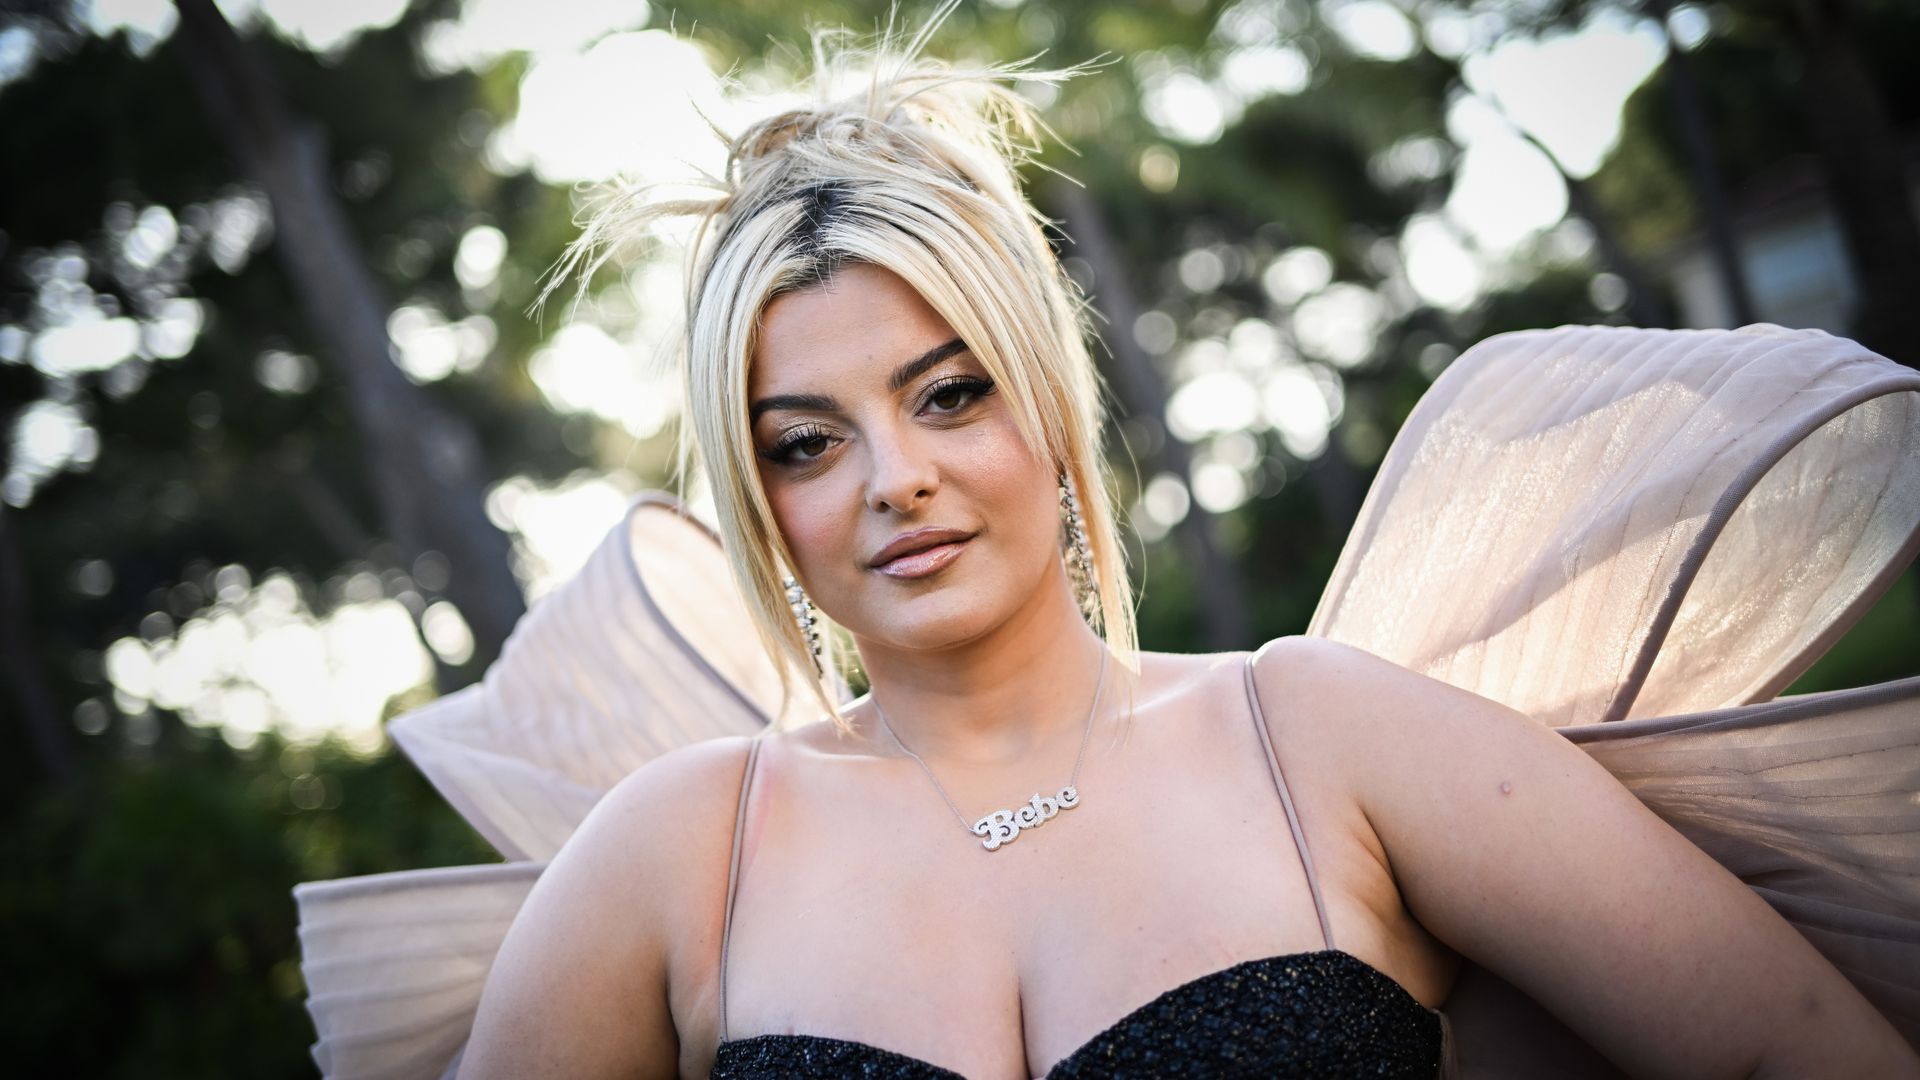 ebe Rexha attends the amfAR Cannes Gala 2023 at Hotel du Cap-Eden-Roc on May 25, 2023 in Cap d'Antibes, France